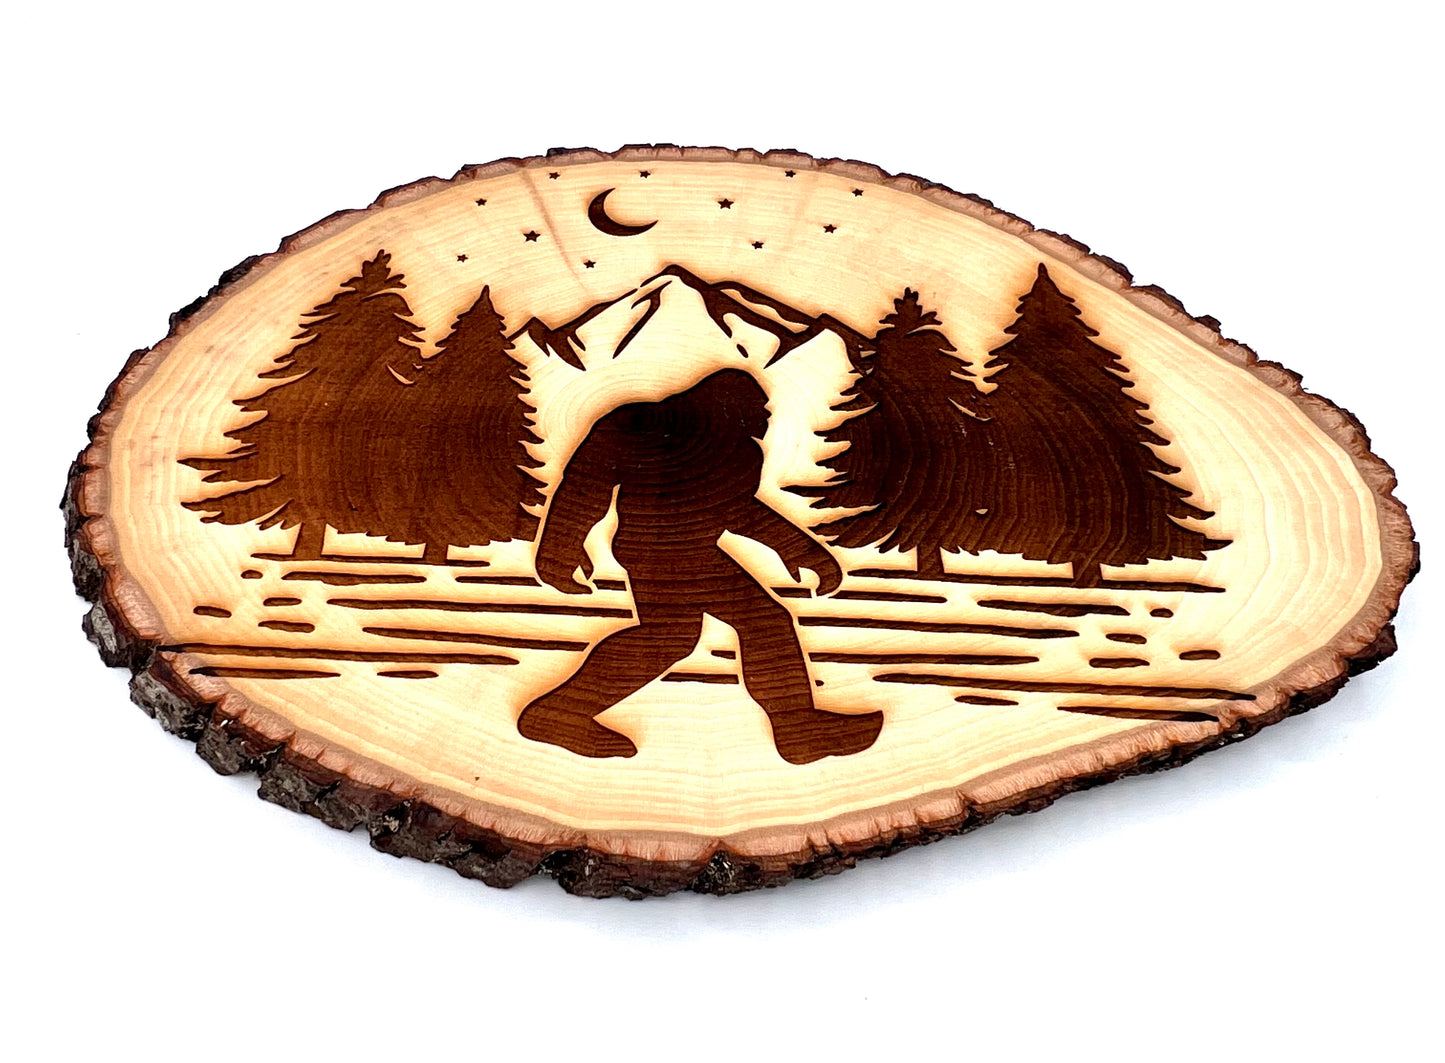 Bigfoot Sasquatch Walking in the Woods Engraved on Round Wood with Bark Edges